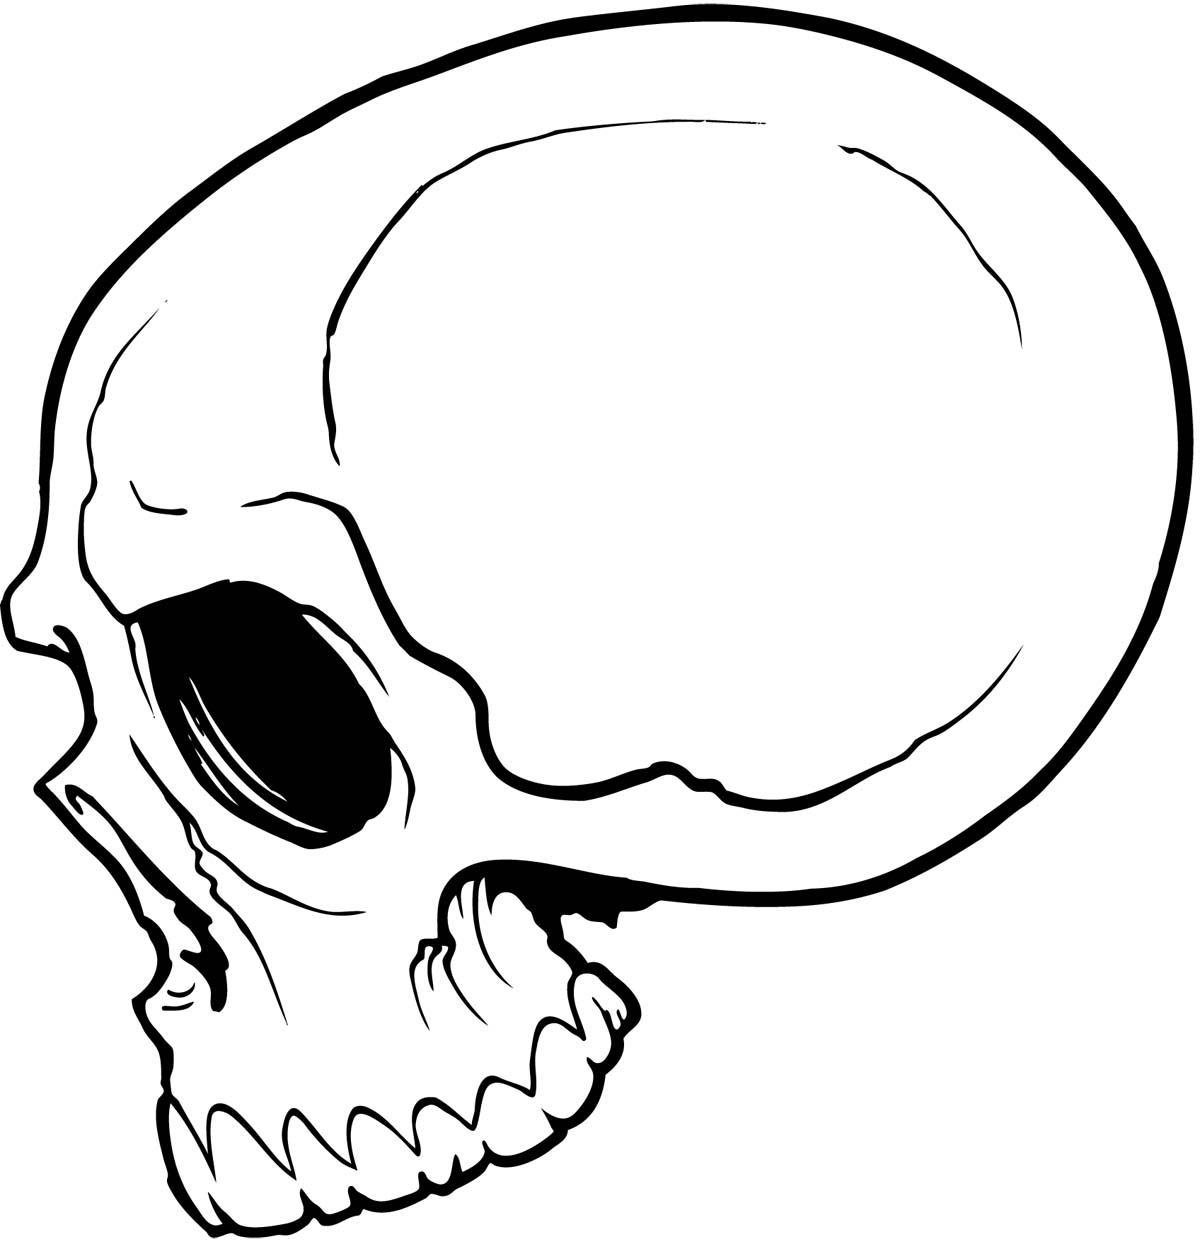 Skull color pages - Coloring Pages  Pictures - IMAGIXS